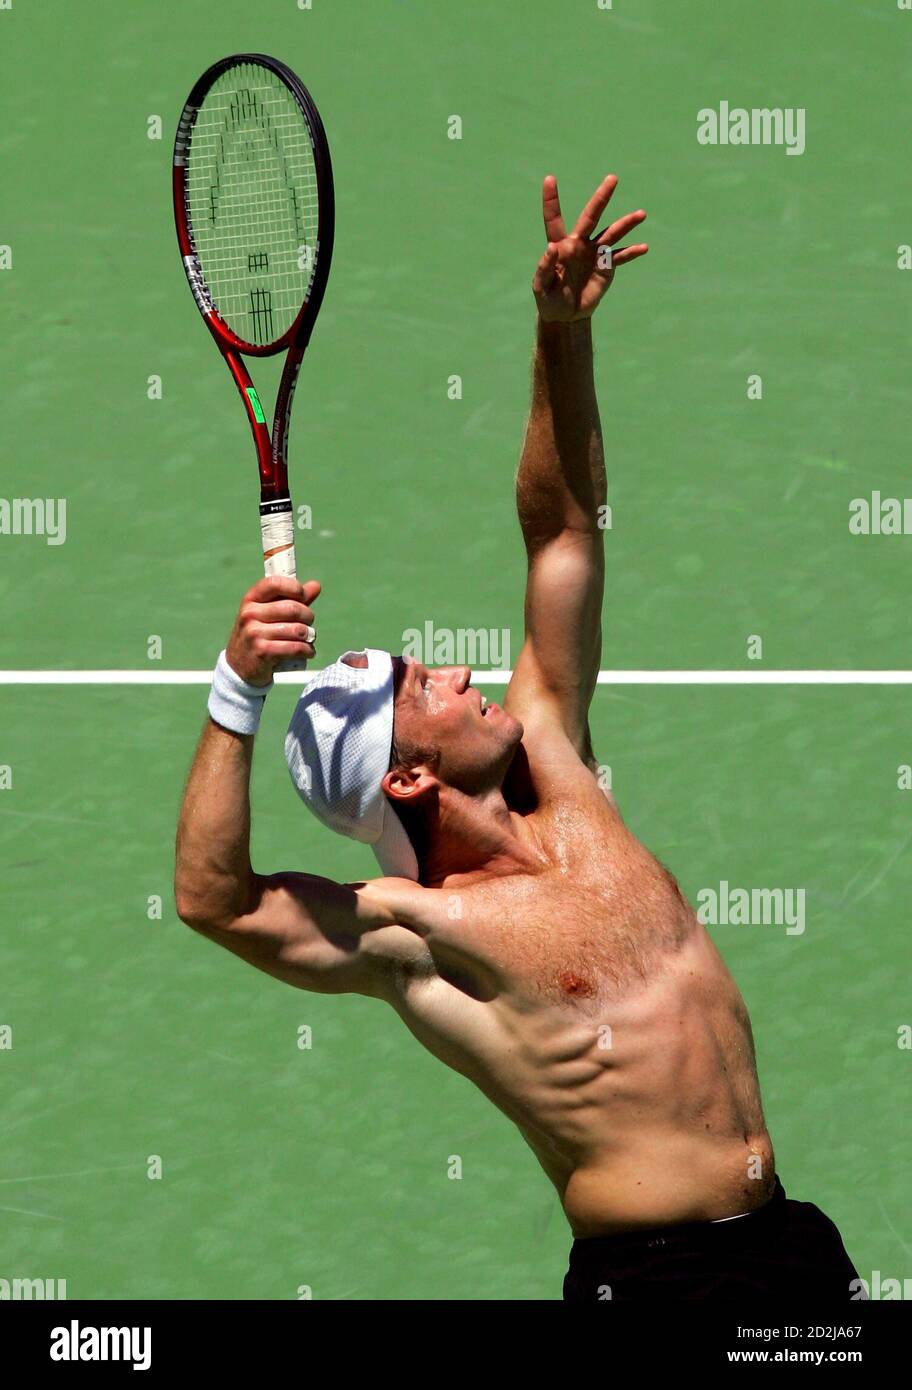 Germany's Rainer Schuettler serves during a training session at Melbourne  Park January 14, 2006. Schuettler is training in preparation for the  Australian Open, the first Grand Slam tennis tournament of the year,